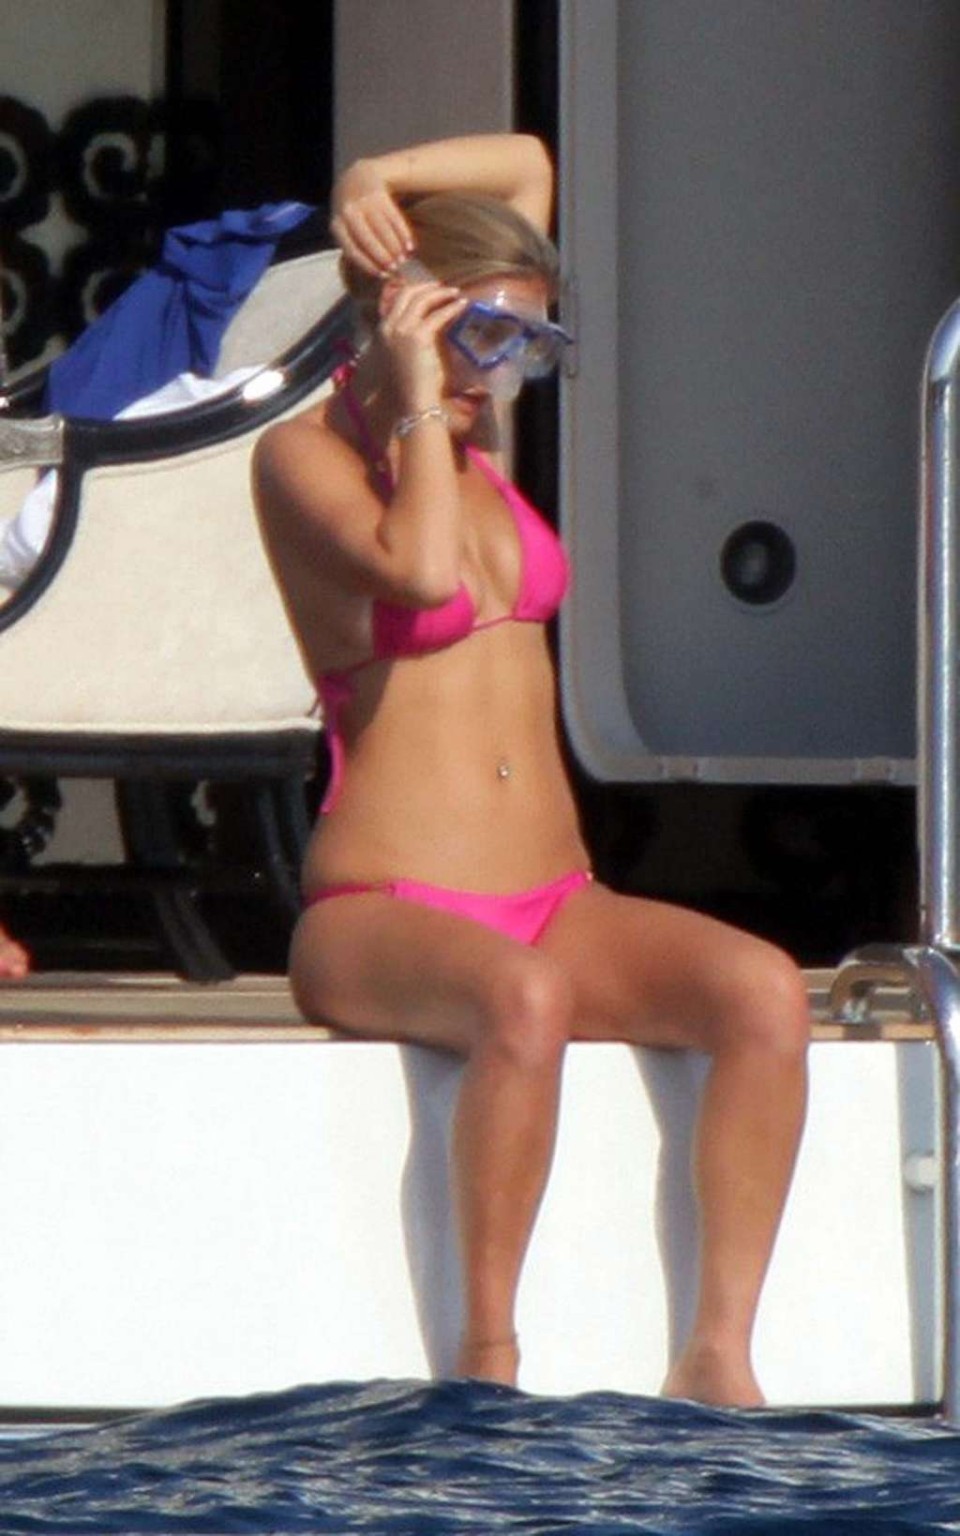 Bar Refaeli looking very sexy in red bikini on yacht paparazzi pictures #75336768